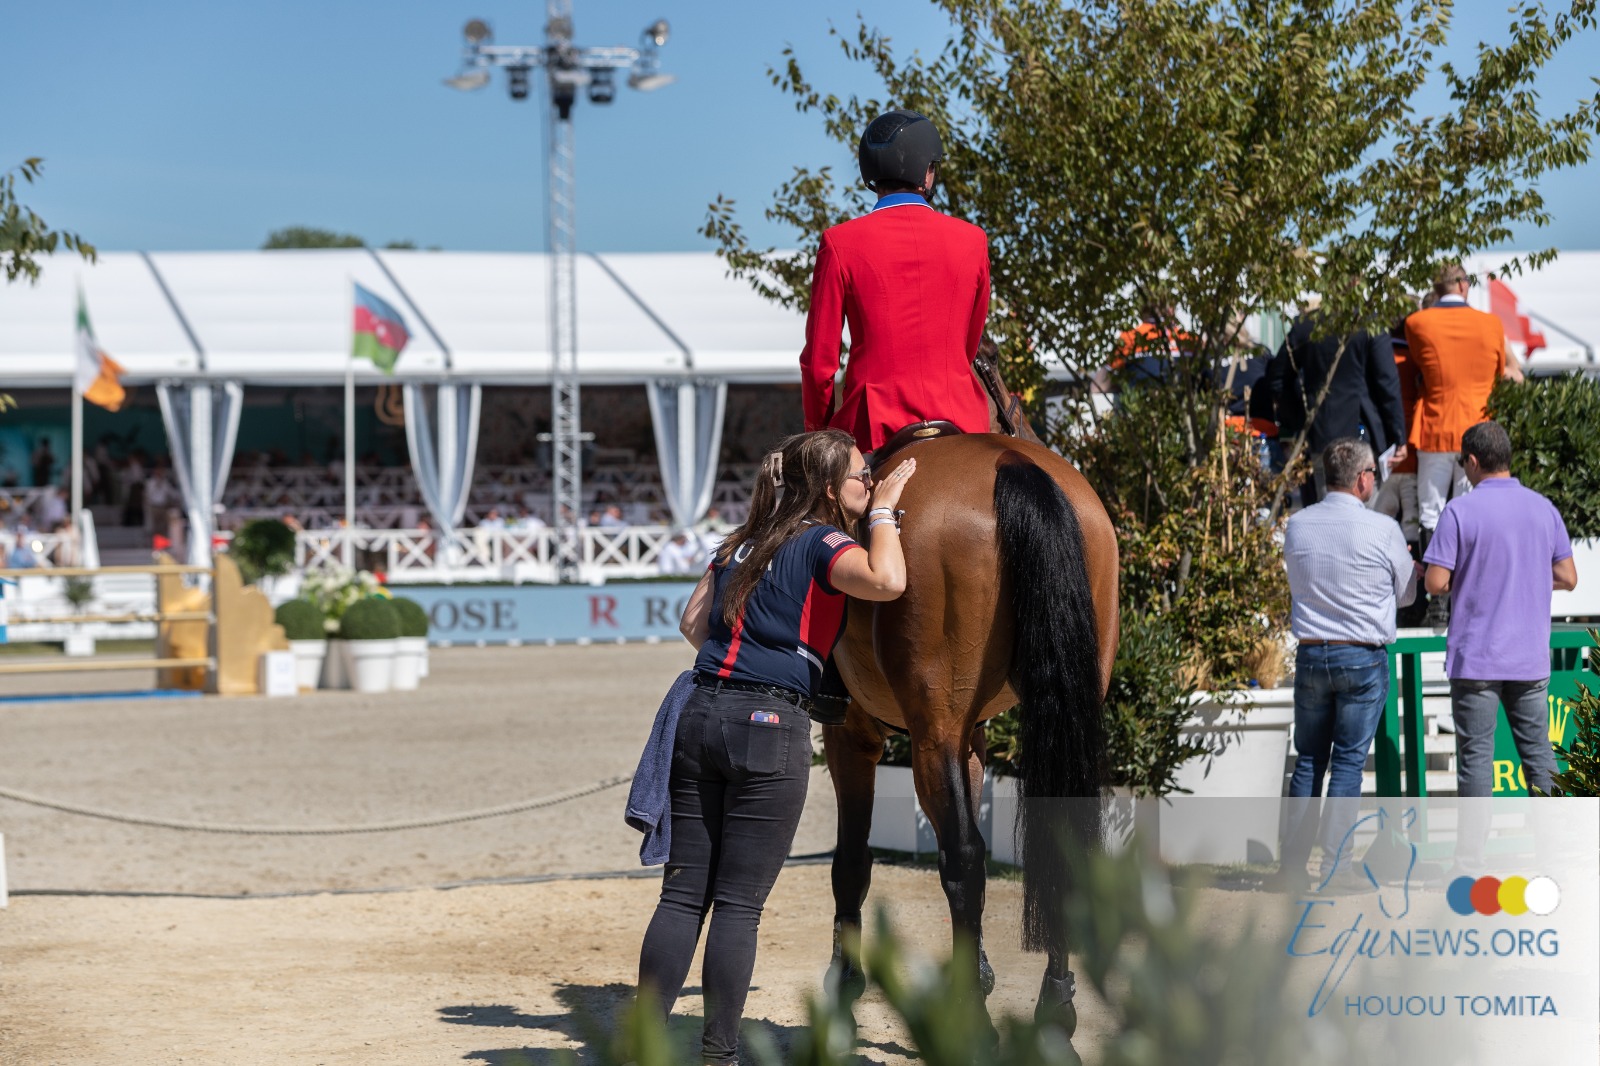 Frans Lens: "You need to be patient and hopeful that the horse and rider combination will be perfect."